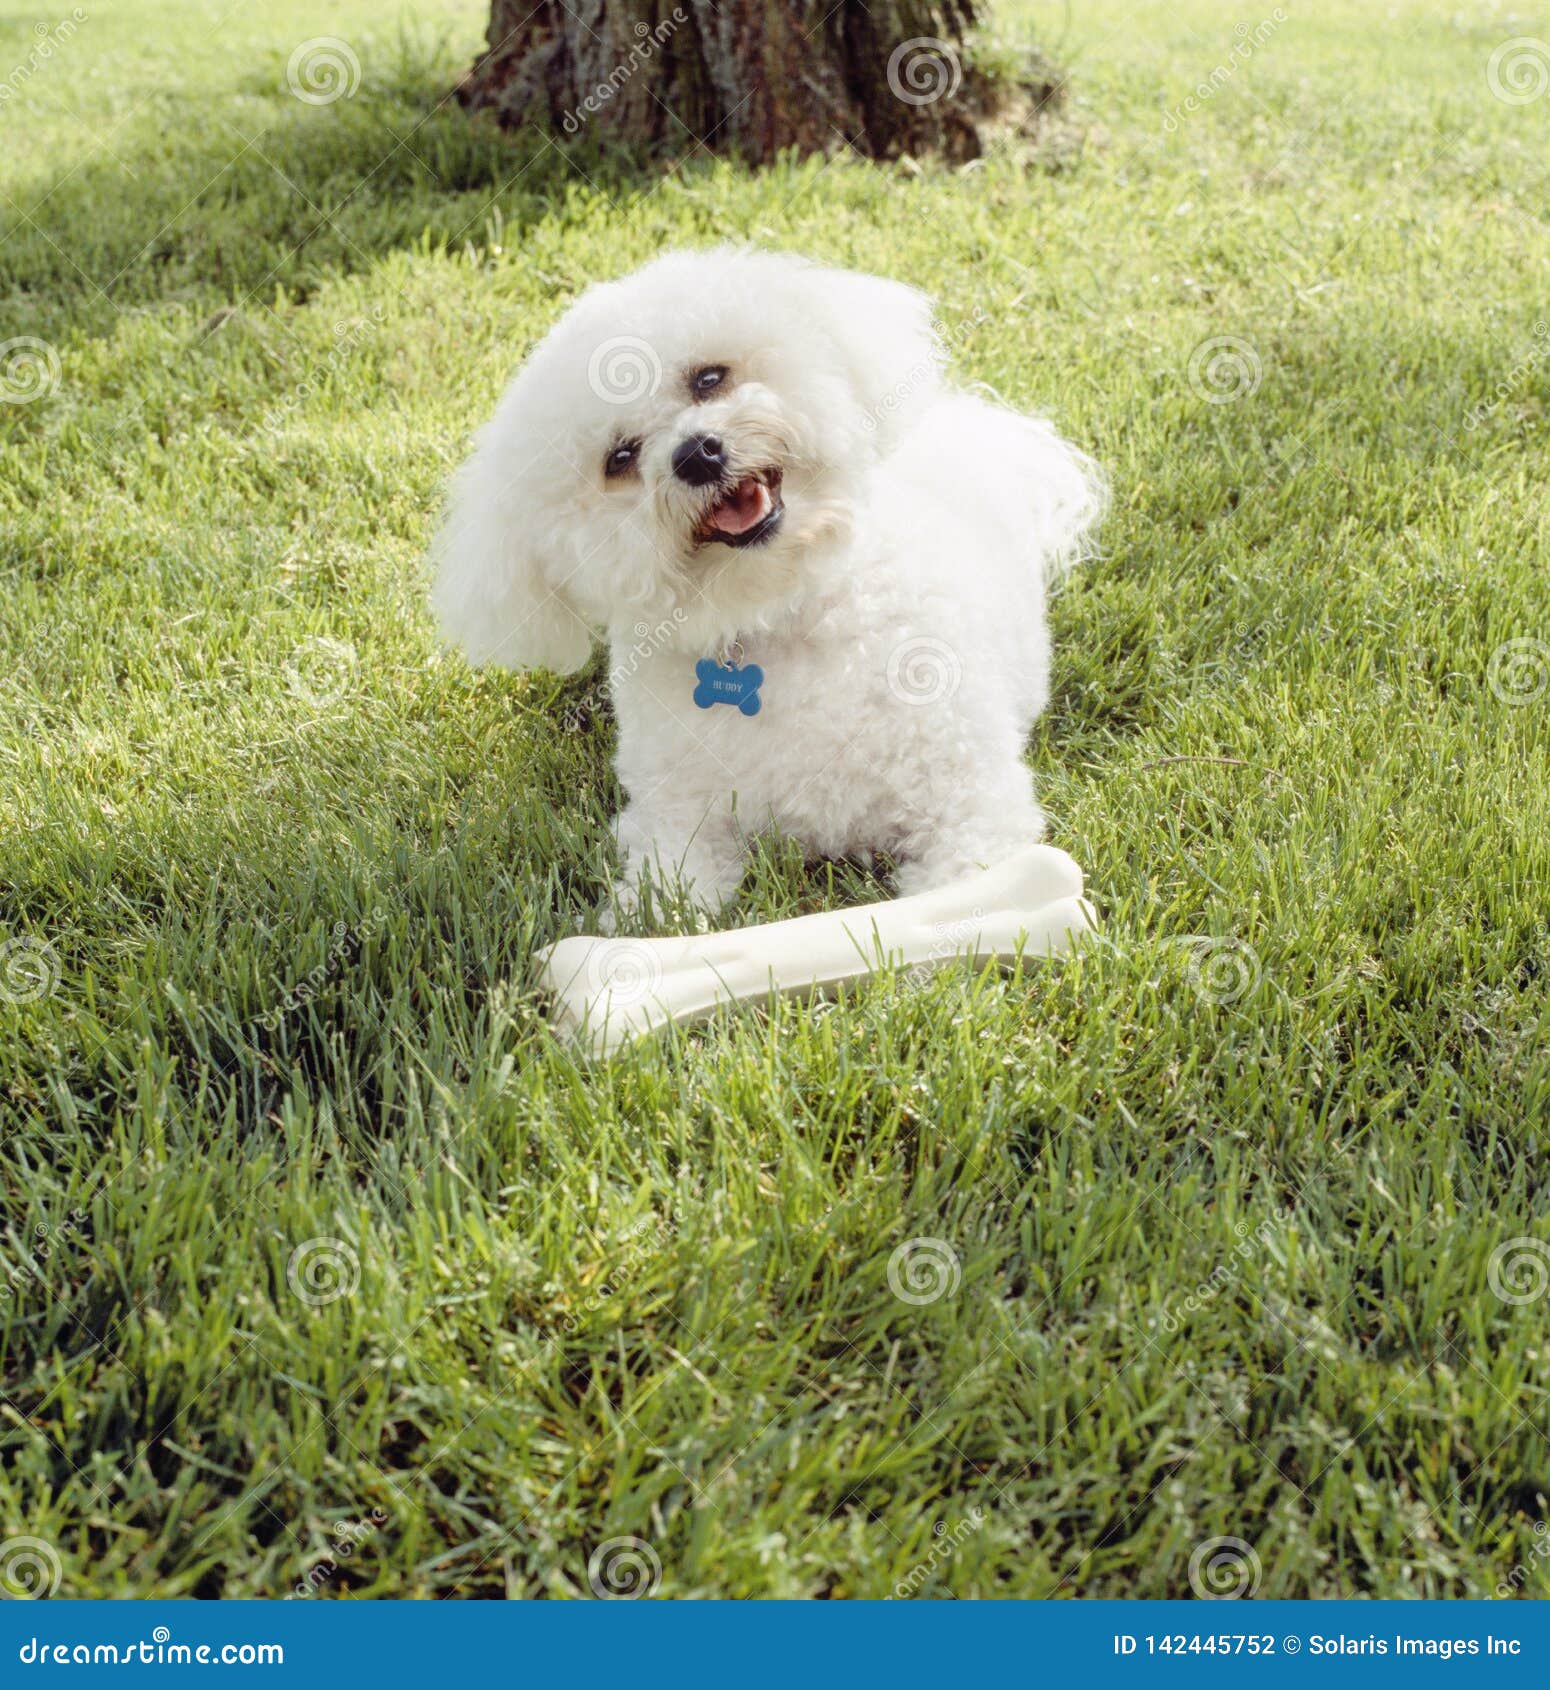 Cute, Happy, Bichon Frise Dog With Clean White Fur Playing